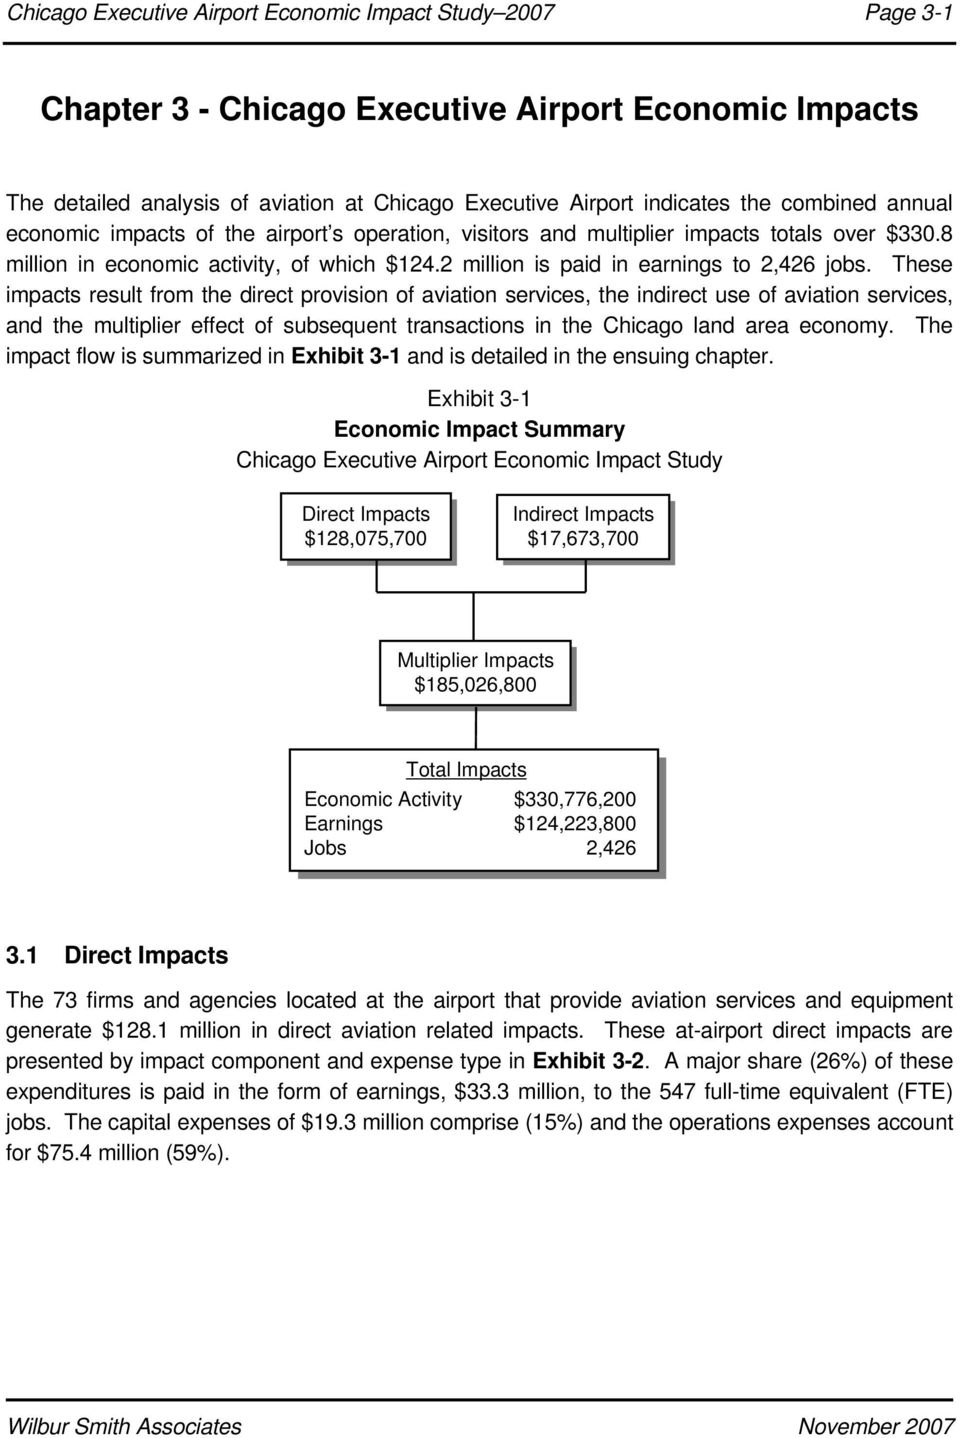 These impacts result from the direct provision of aviation services, the indirect use of aviation services, and the multiplier effect of subsequent transactions in the Chicago land area economy.